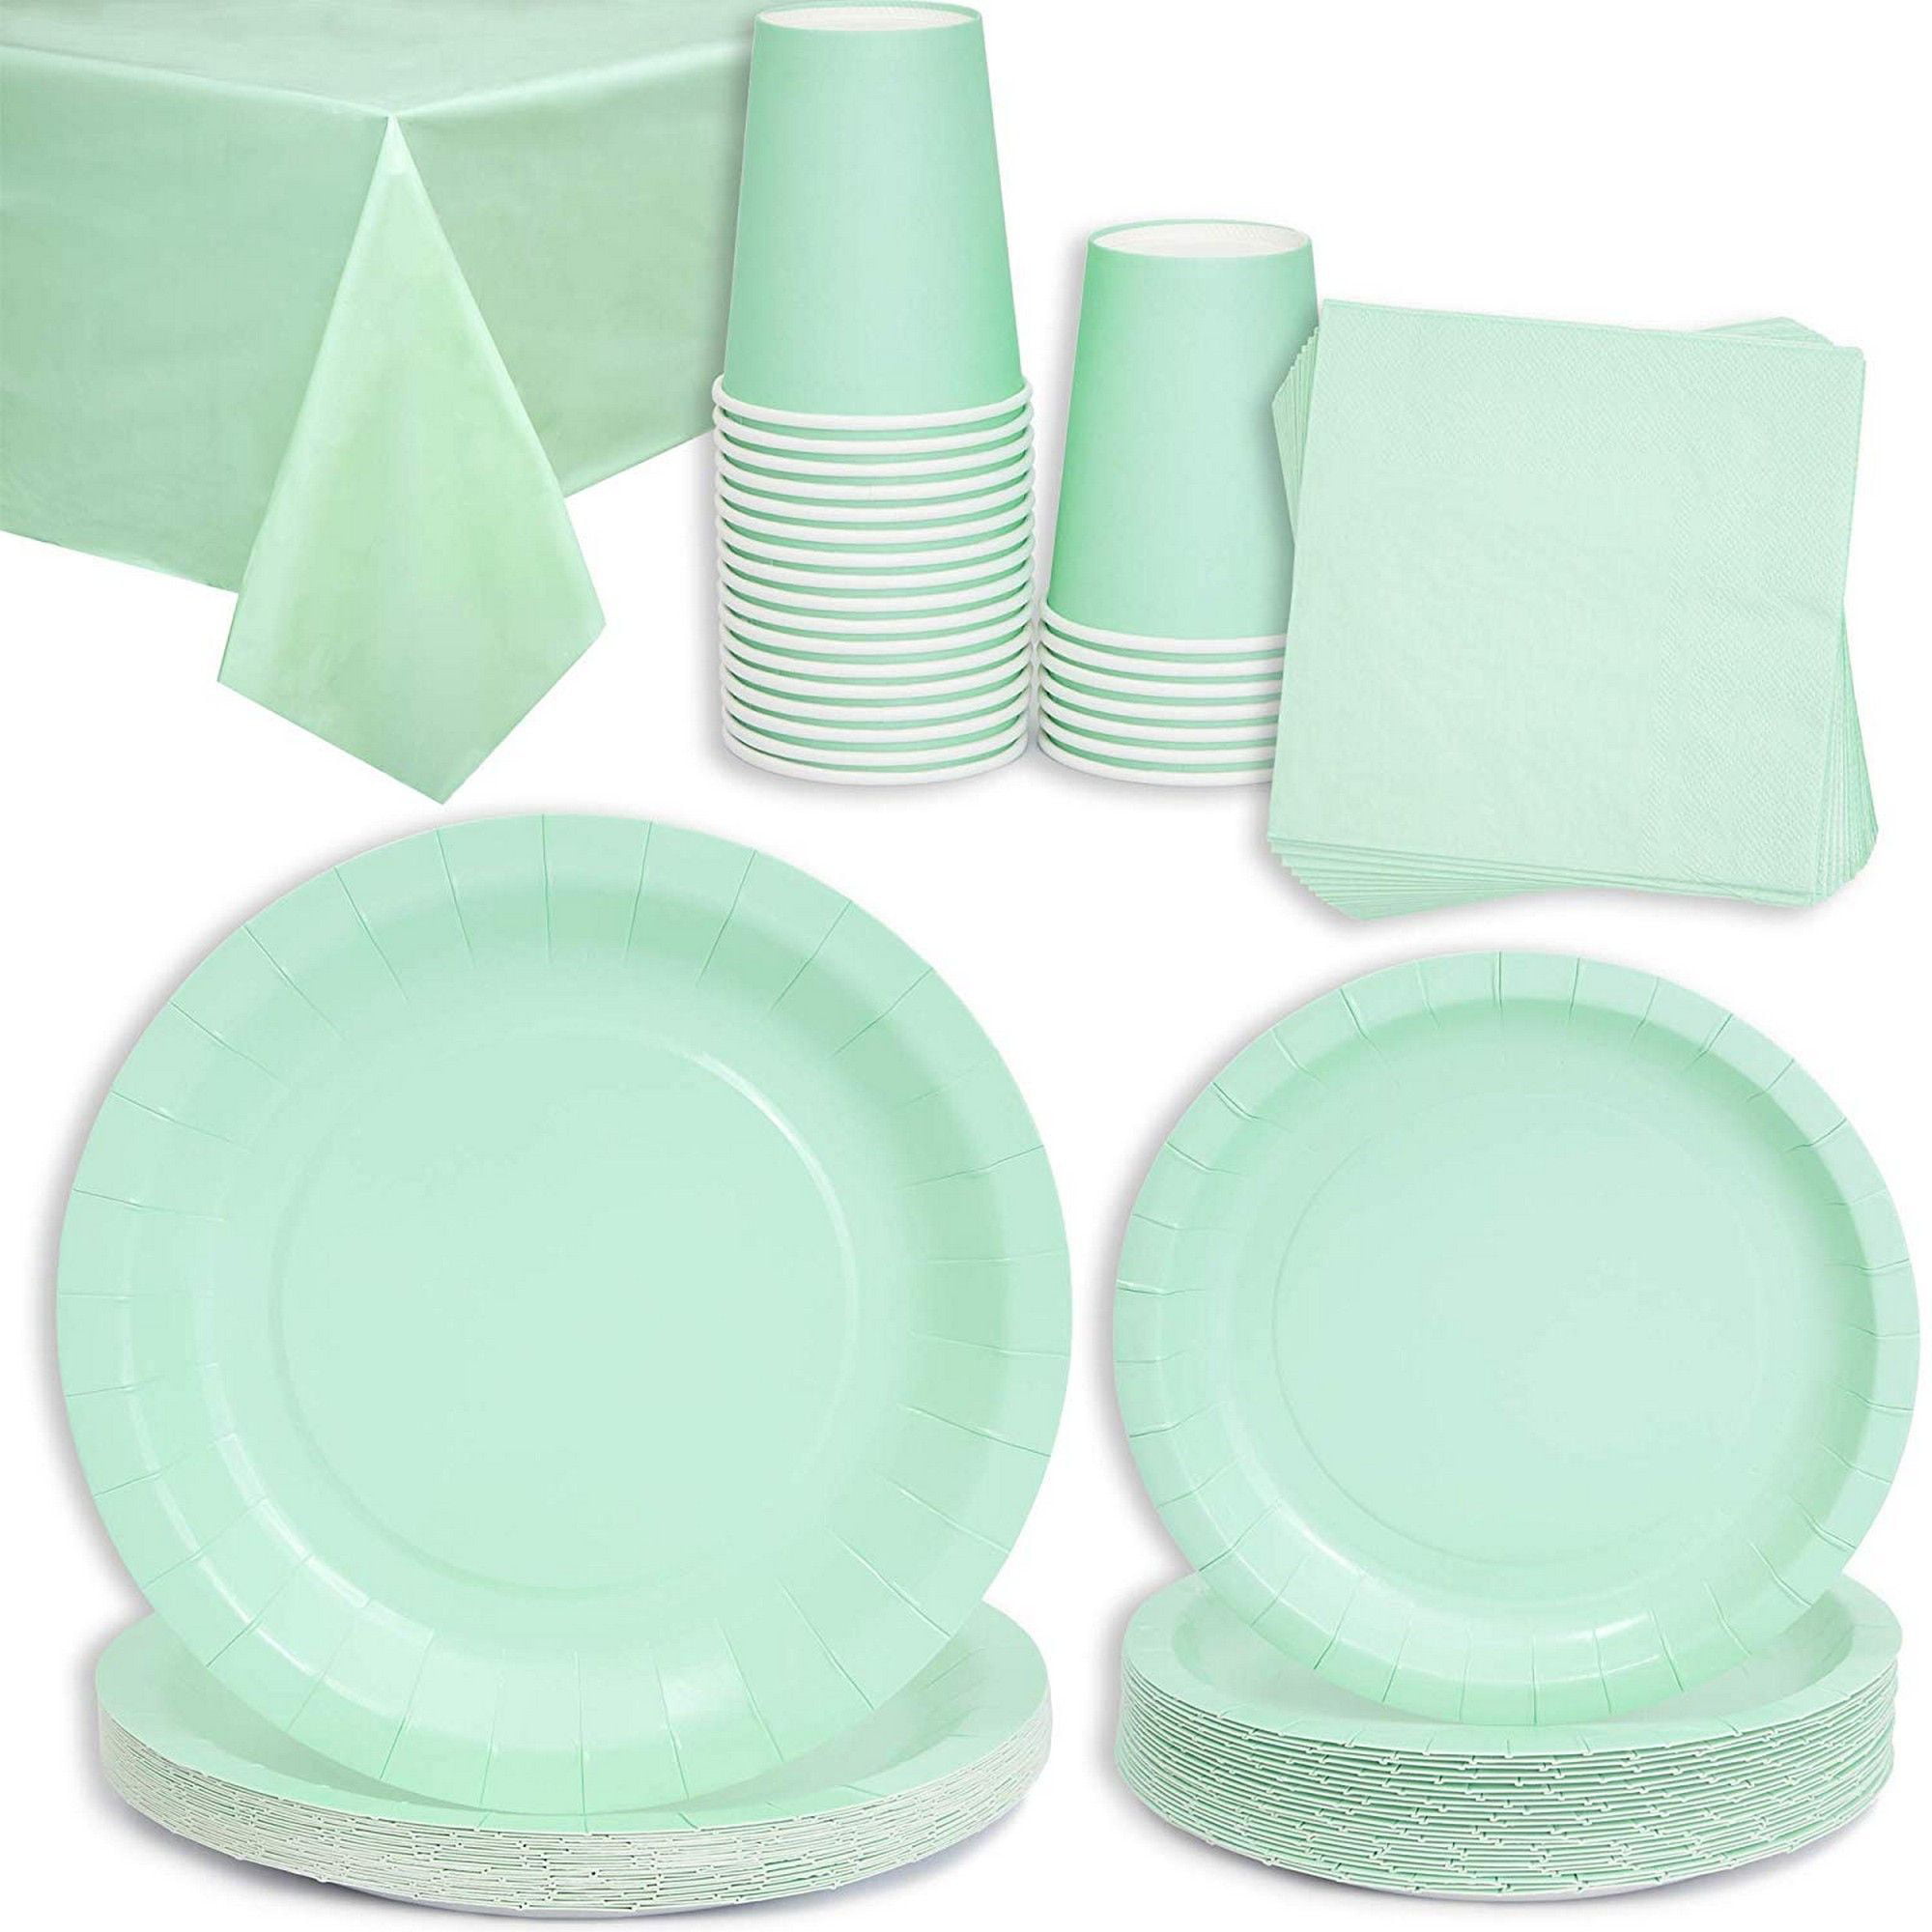 Gymnastic Party Supplies Tableware Set 24 9 Plates 24 7 Plates 24 9 oz Cups and 50 Lunch Napkins for Girls Gymnastics Star Disposable Dinnerware Olympic Gymnast Birthday Party Supplies Decorations